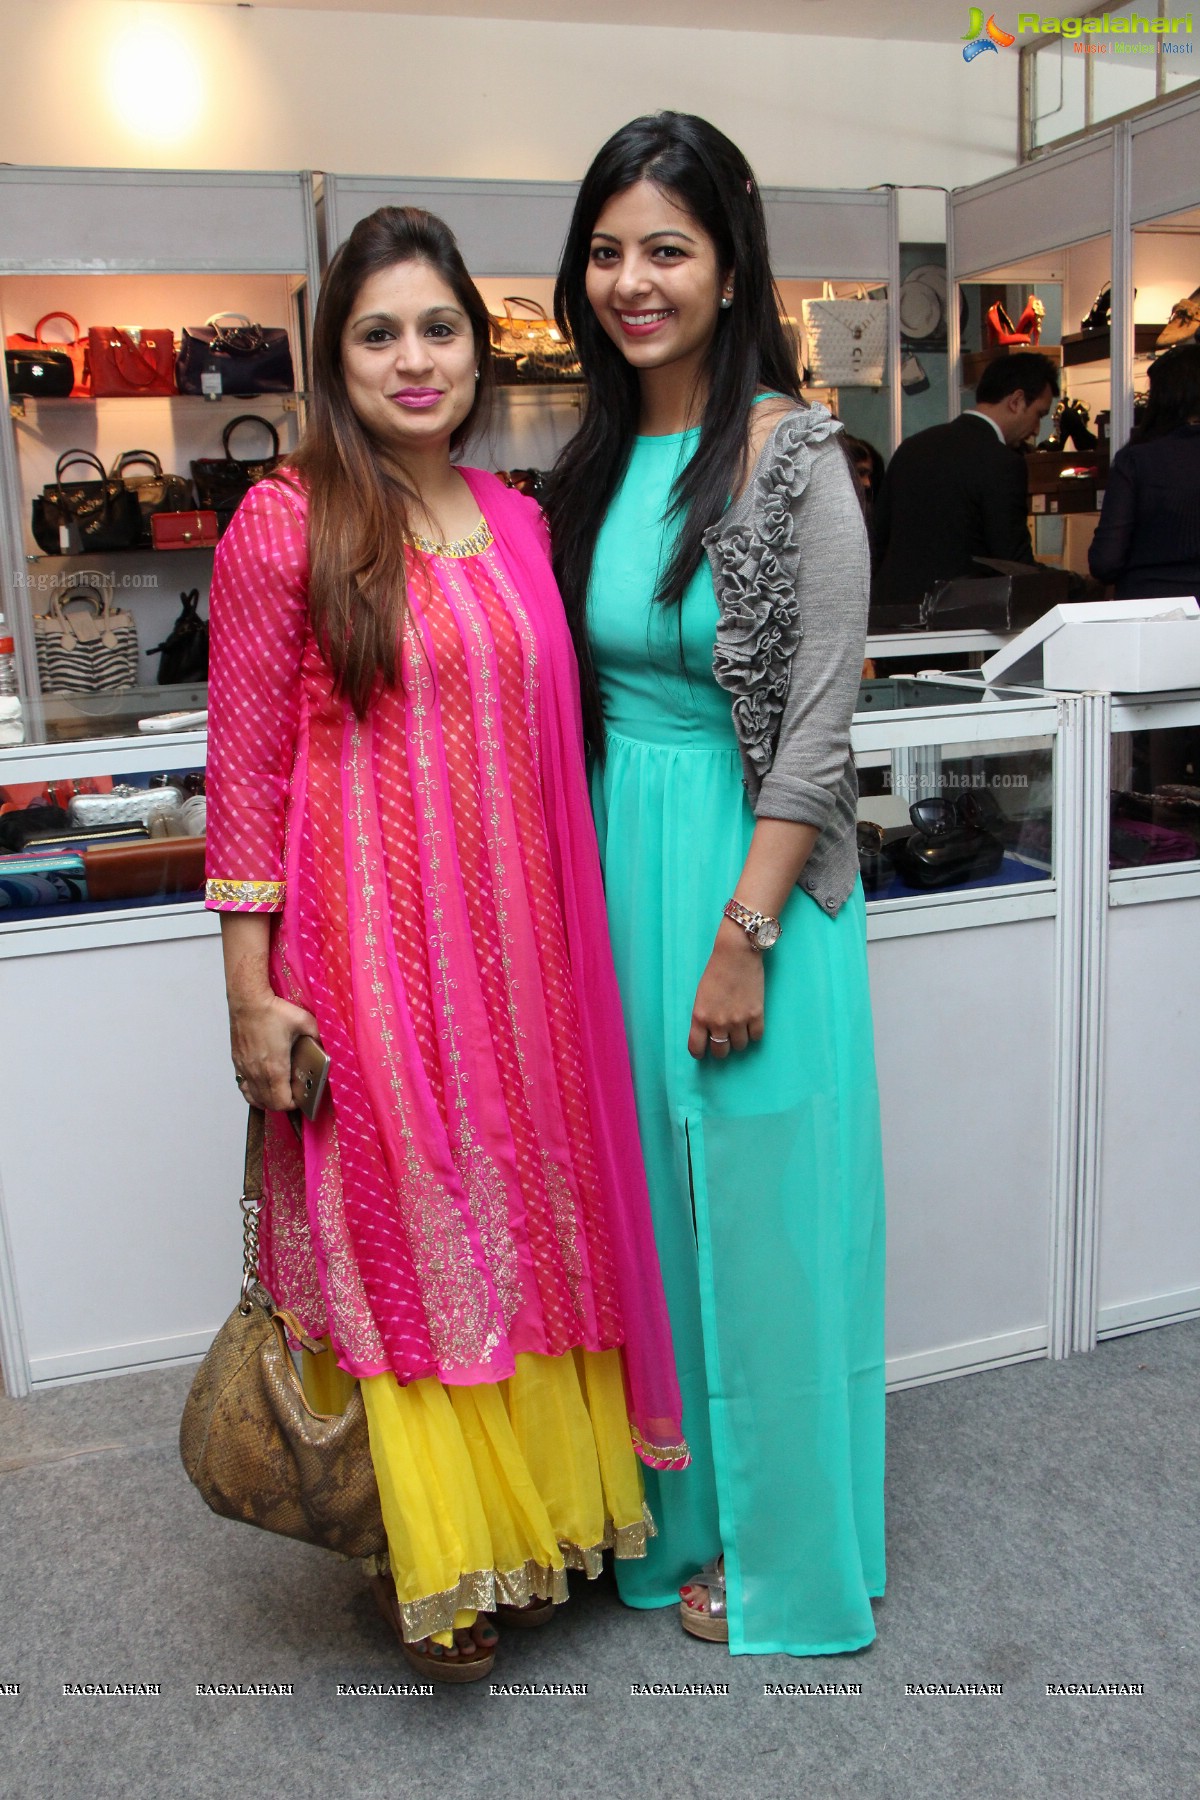 The Indian Luxury Expo 2015 at District N